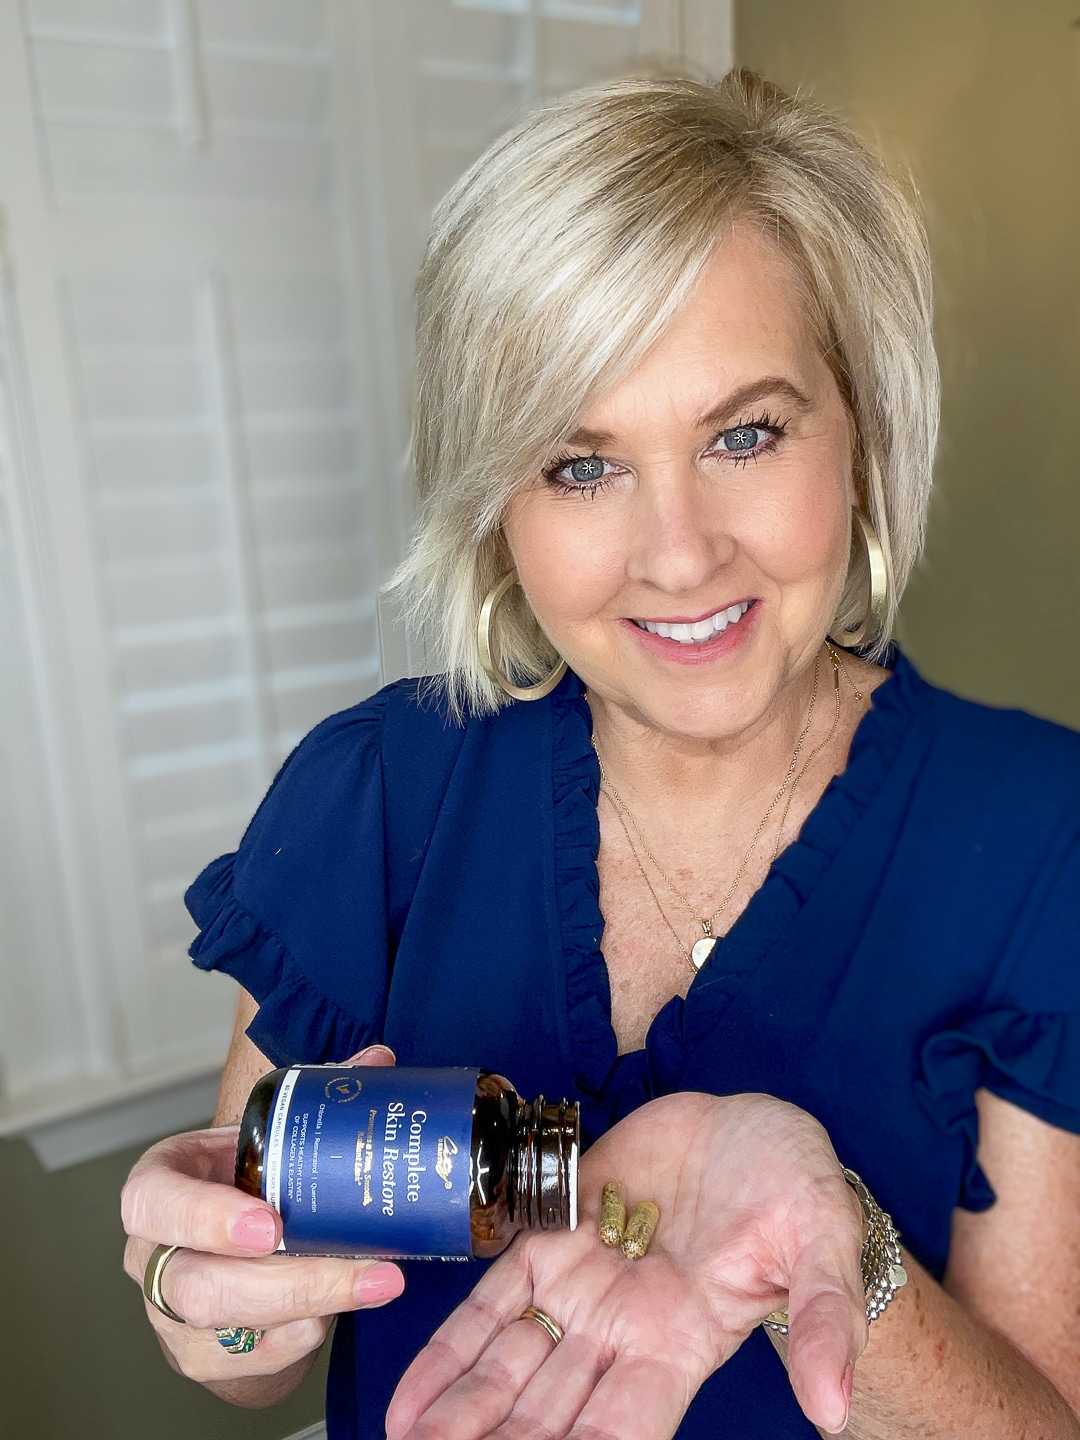 Over 40 Fashion Blogger, Tania Stephens is wearing a blue top and trying City Beauty's Inviscrepe Body Balm17